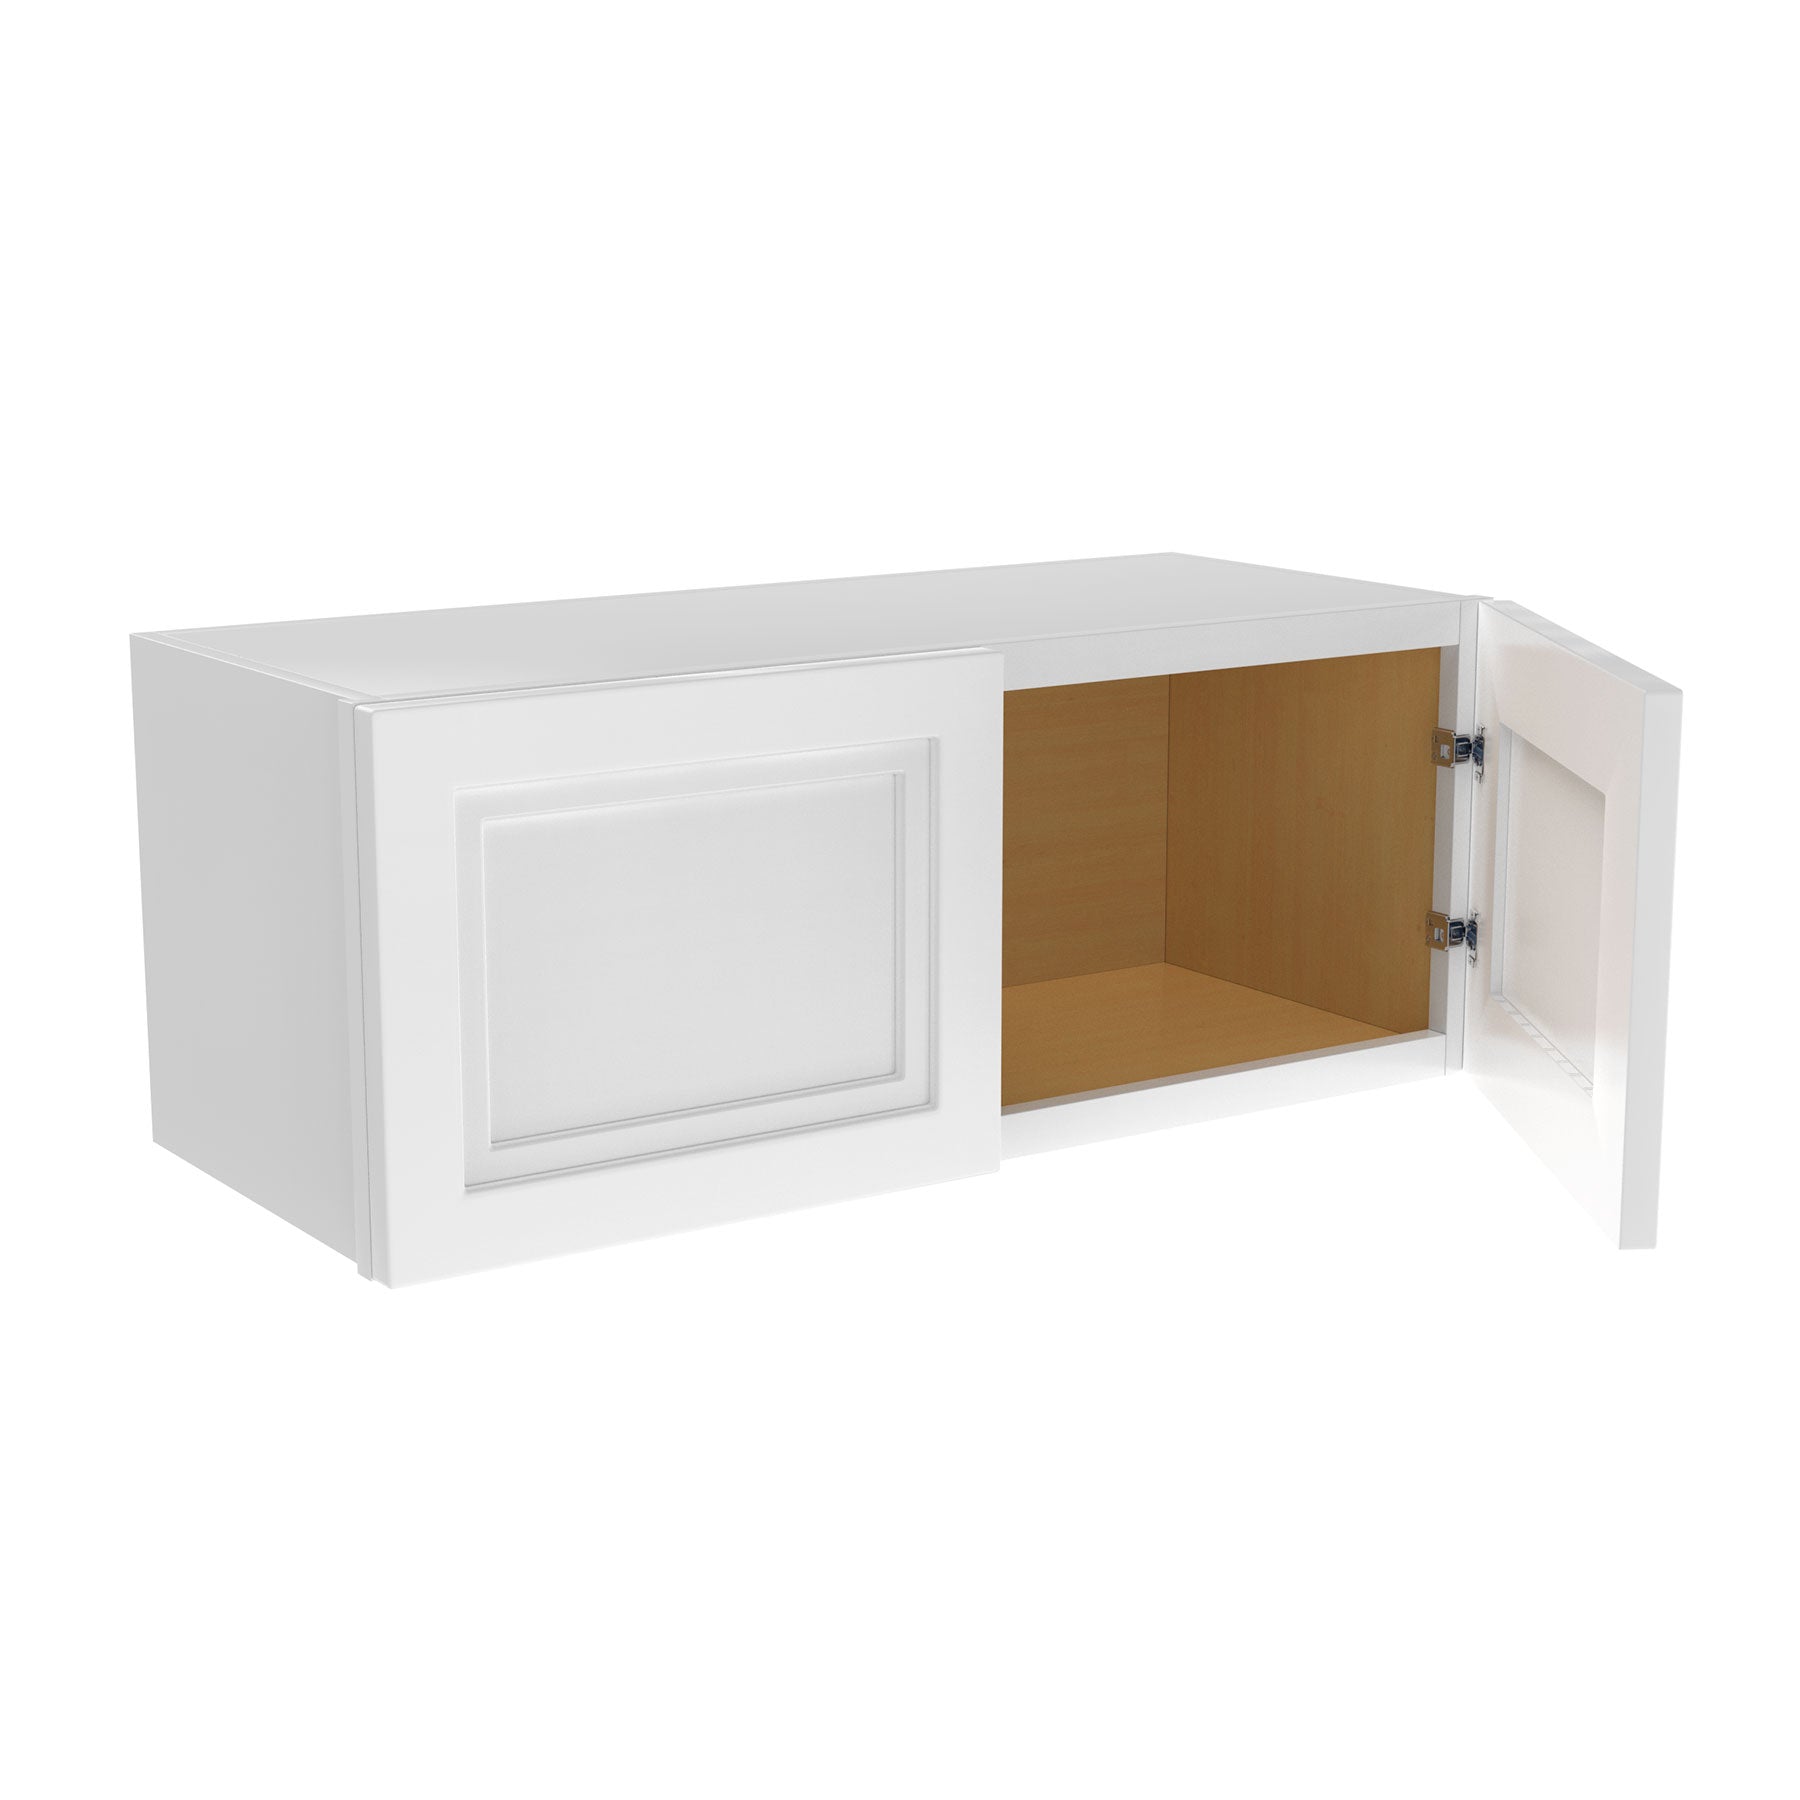 Fashion White - Double Door Wall Cabinet | 30"W x 12"H x 12"D